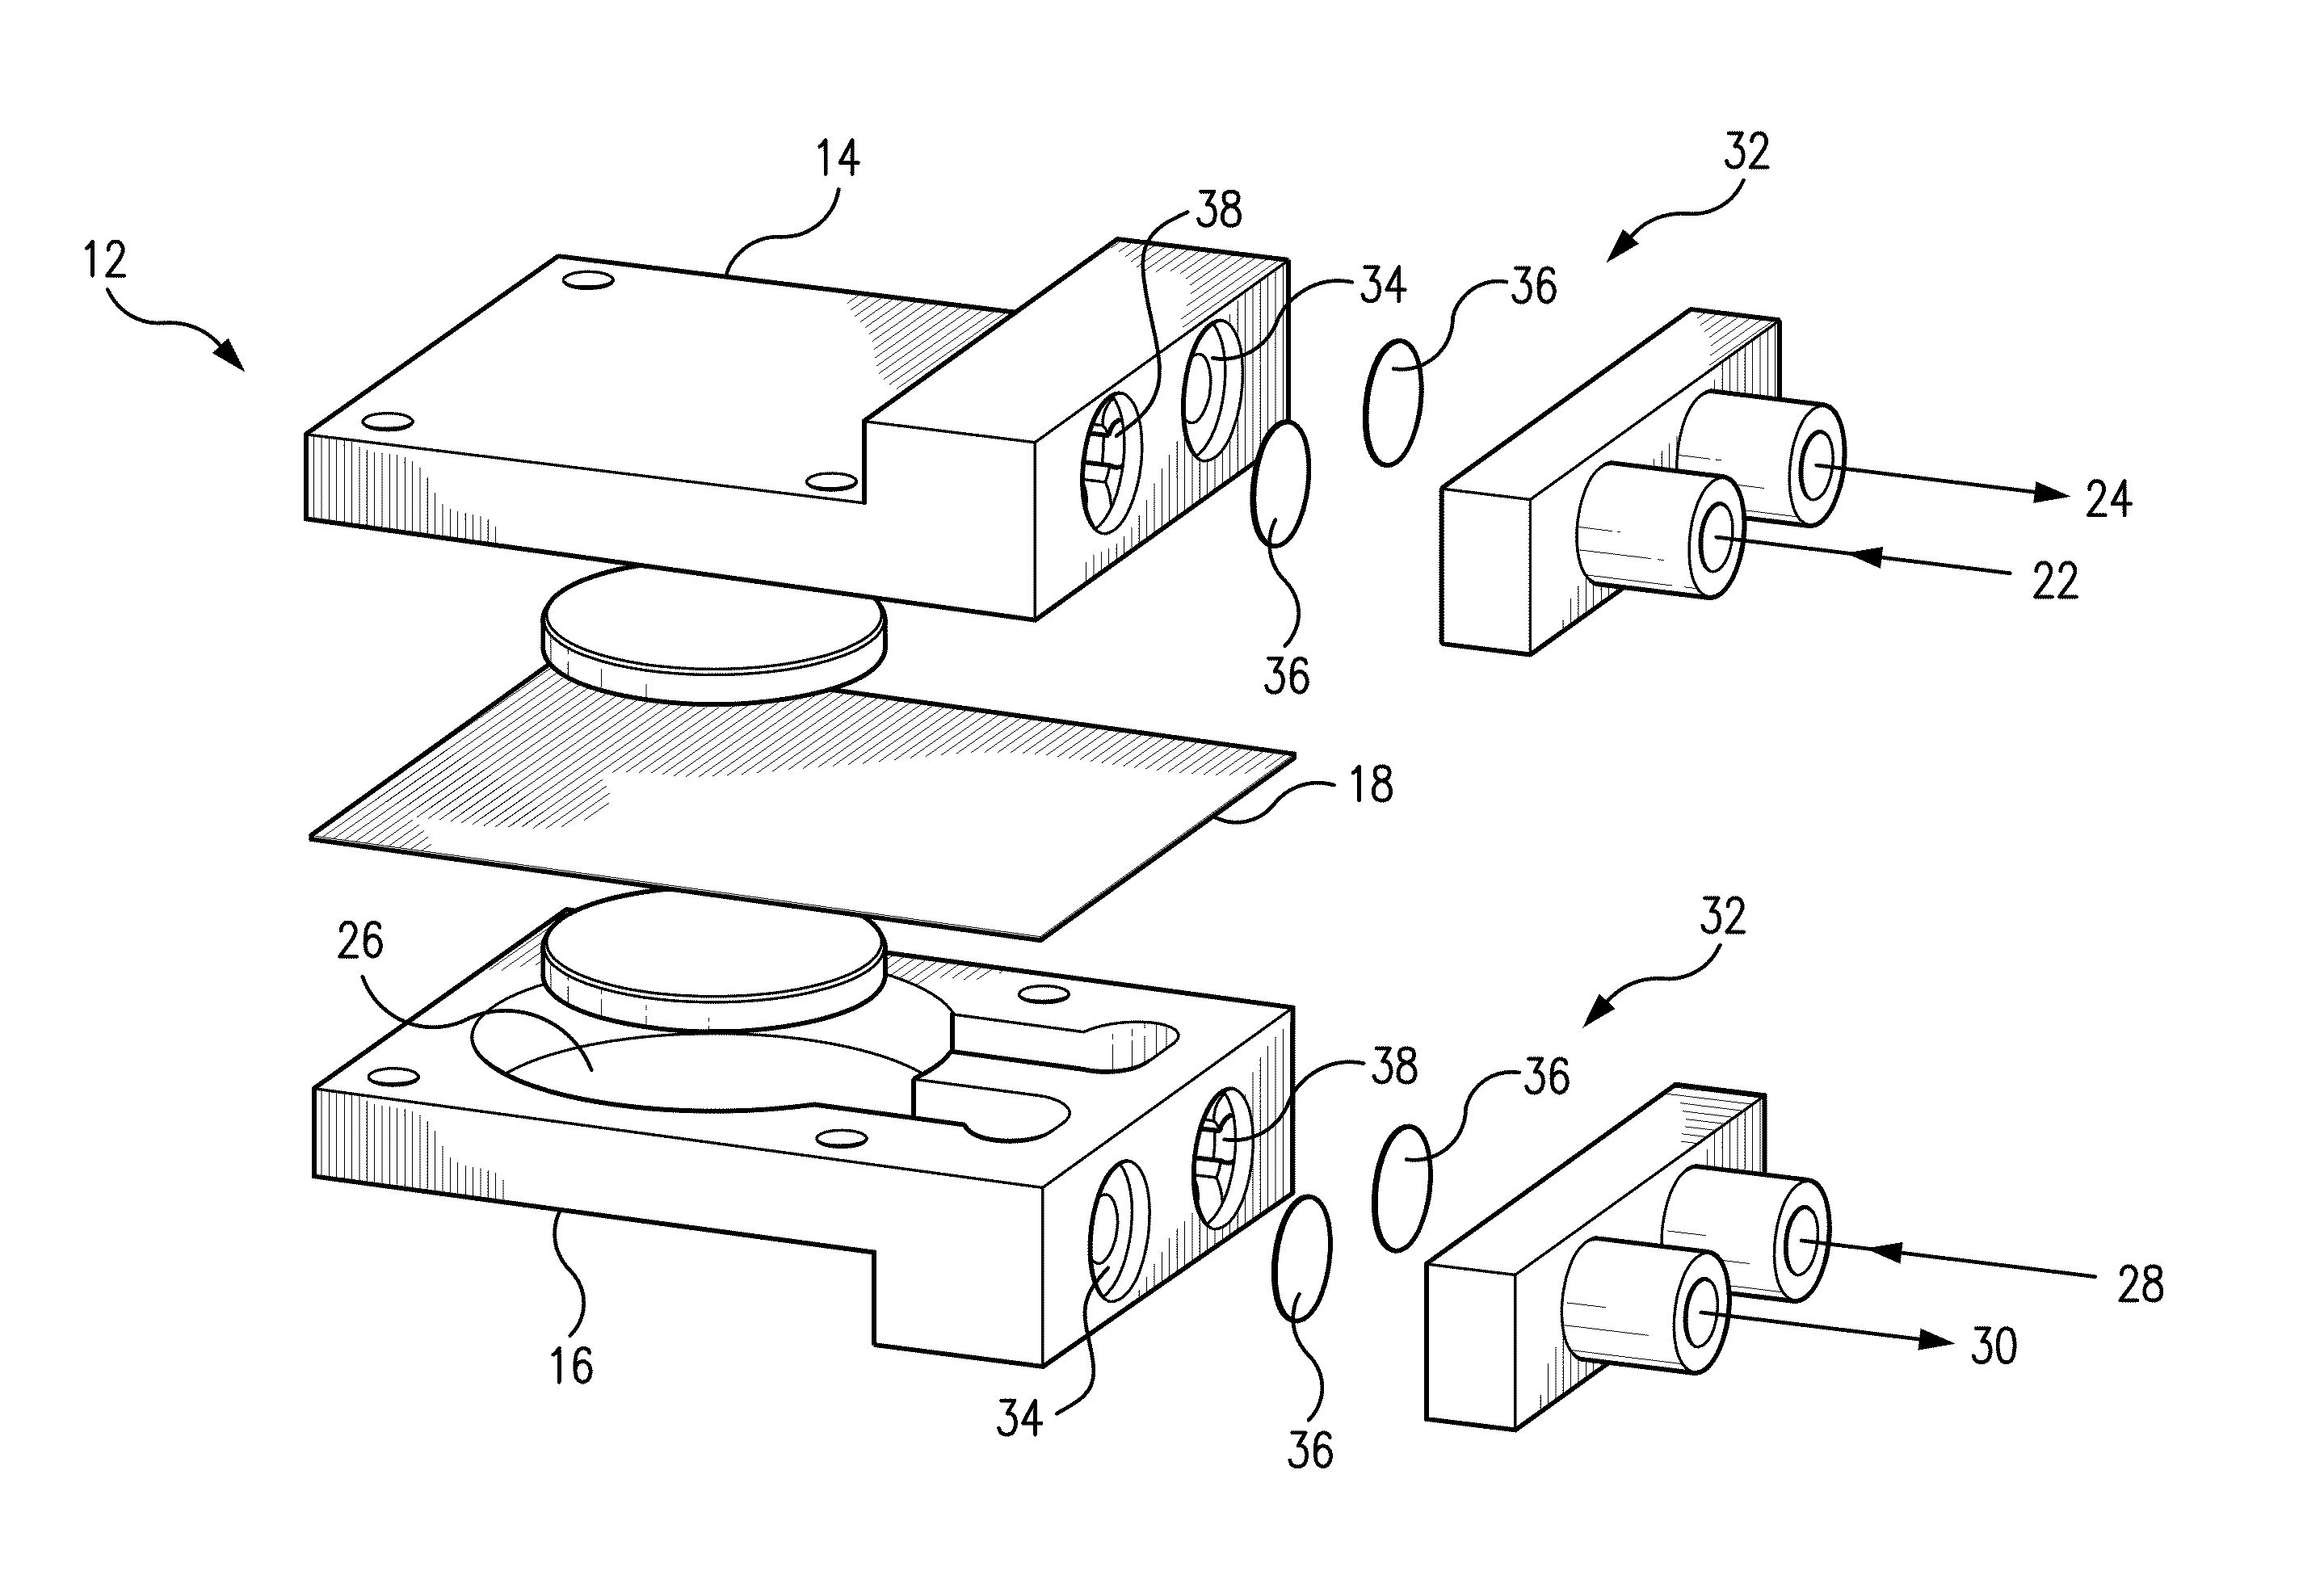 Flow Control System for a Micropump